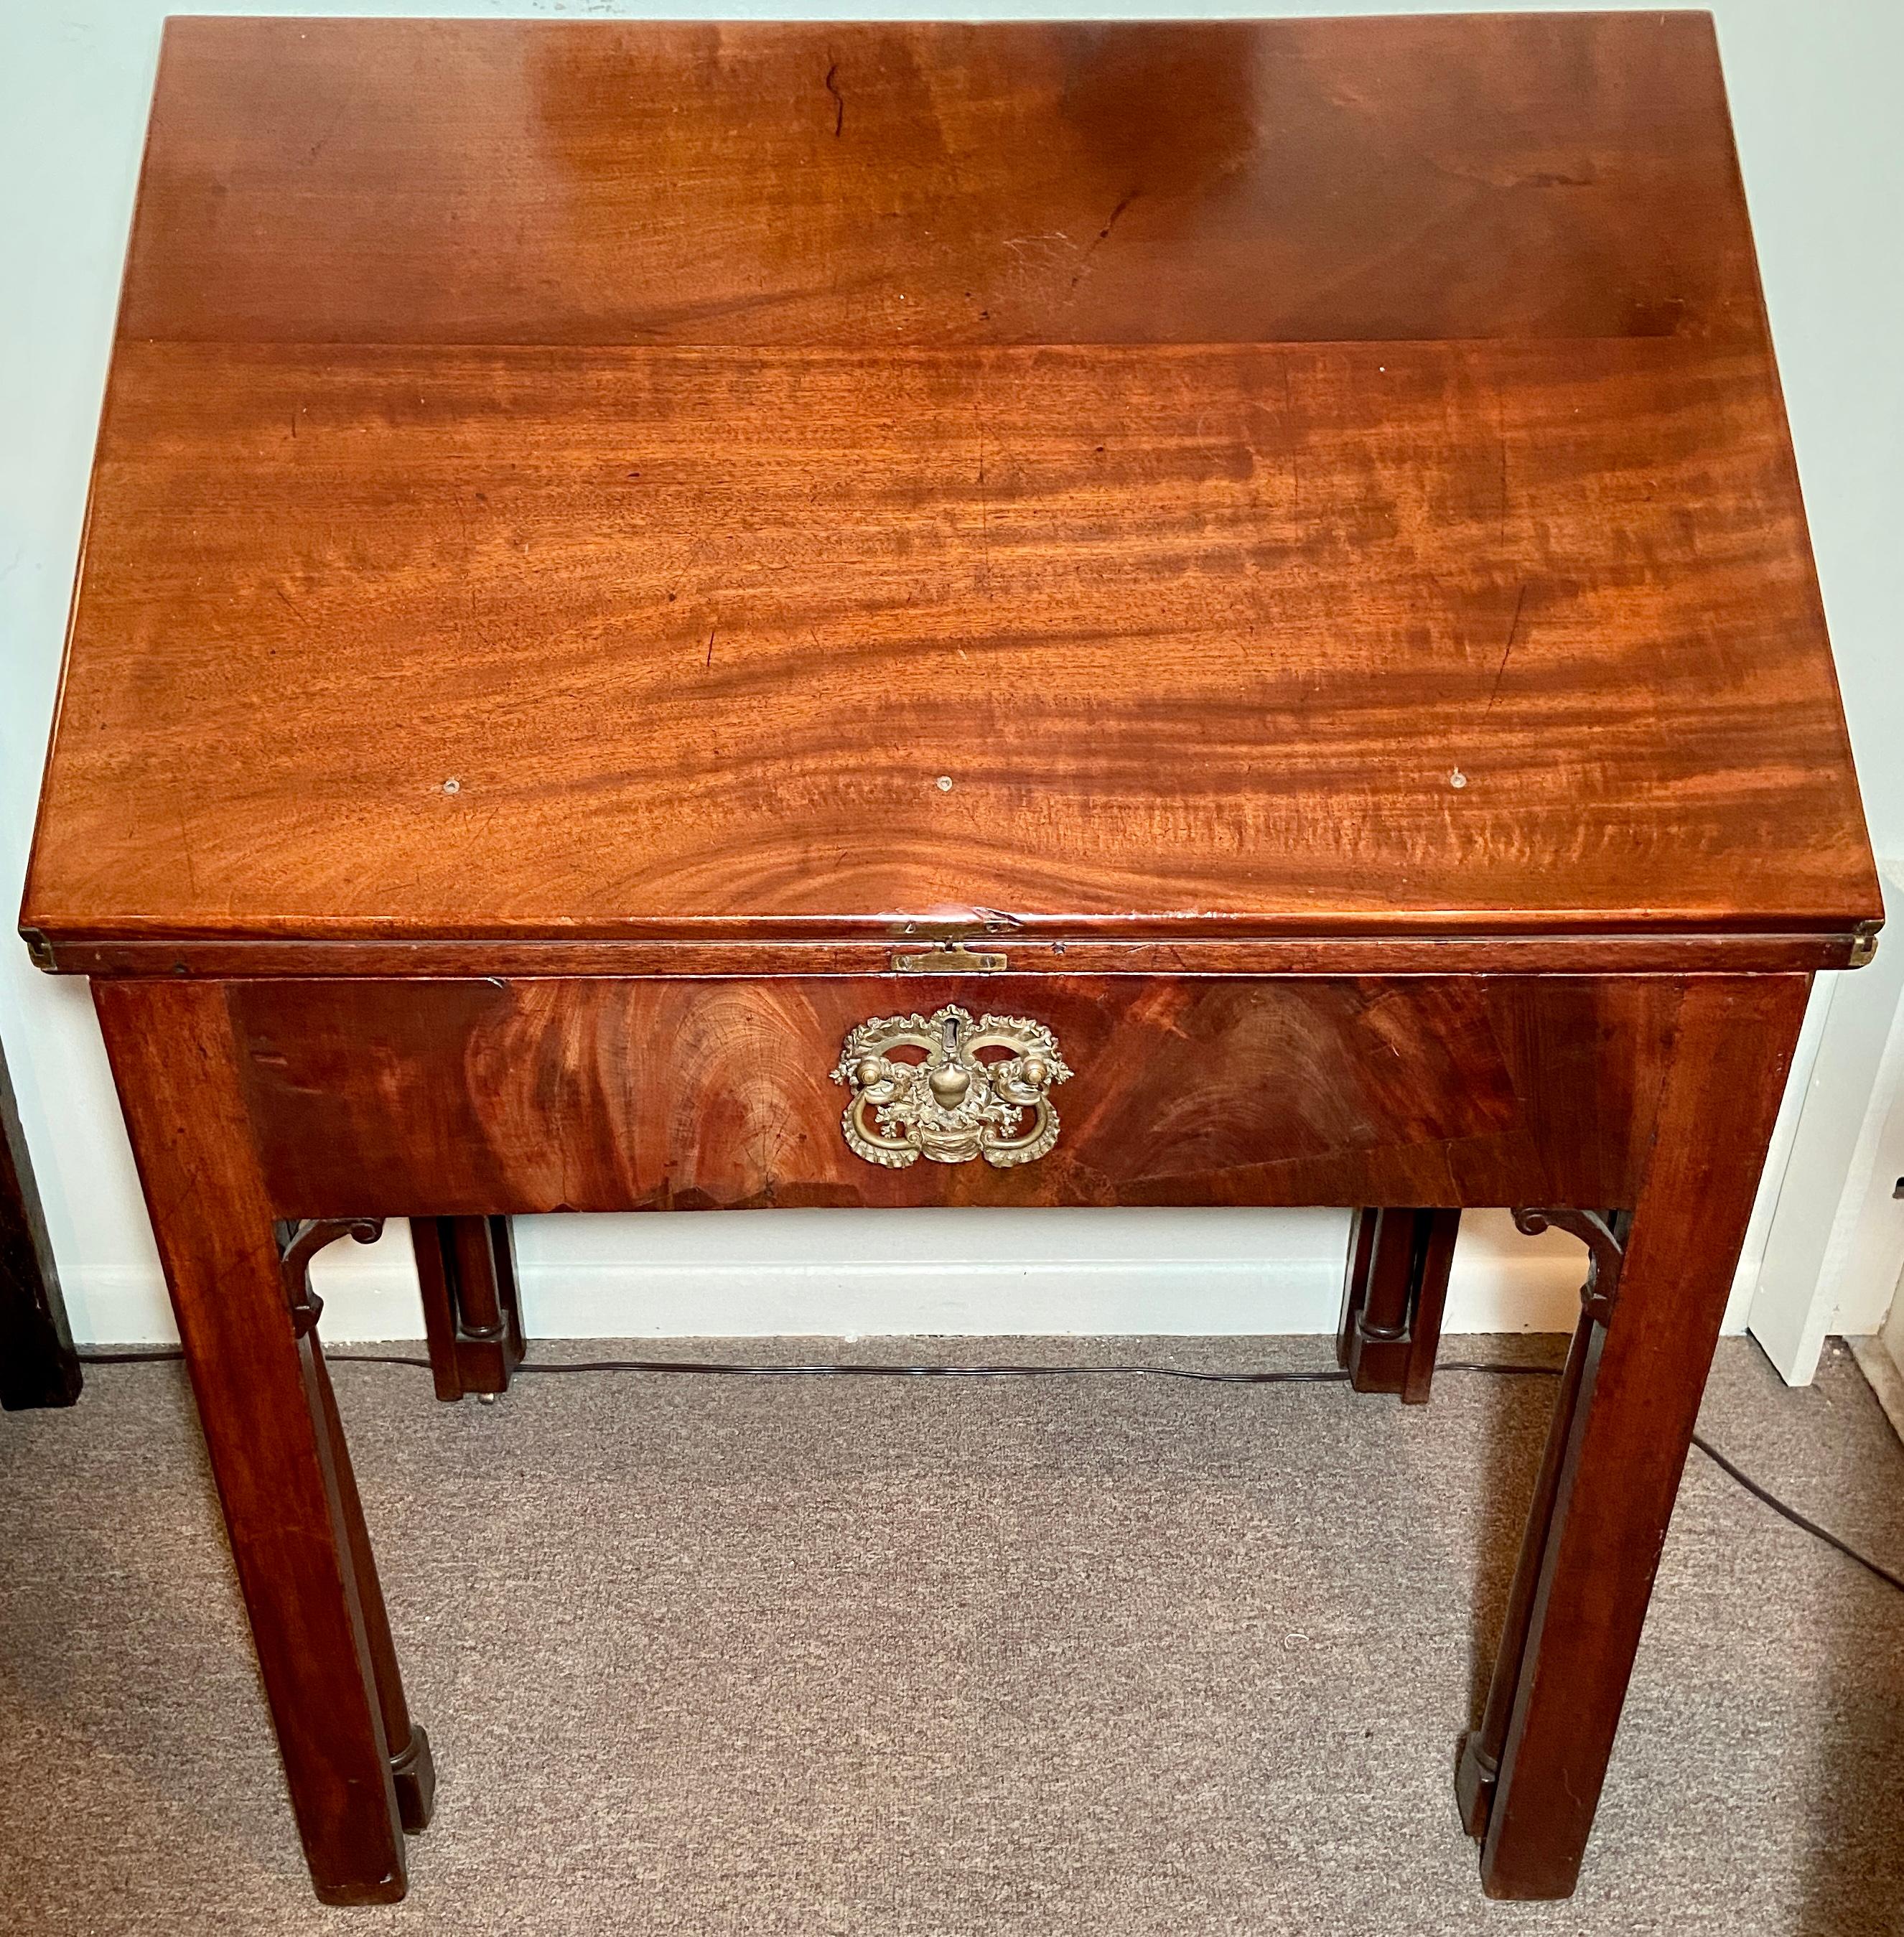 Antique Early 19th Century English Georgian Architect's Desk In Good Condition For Sale In New Orleans, LA